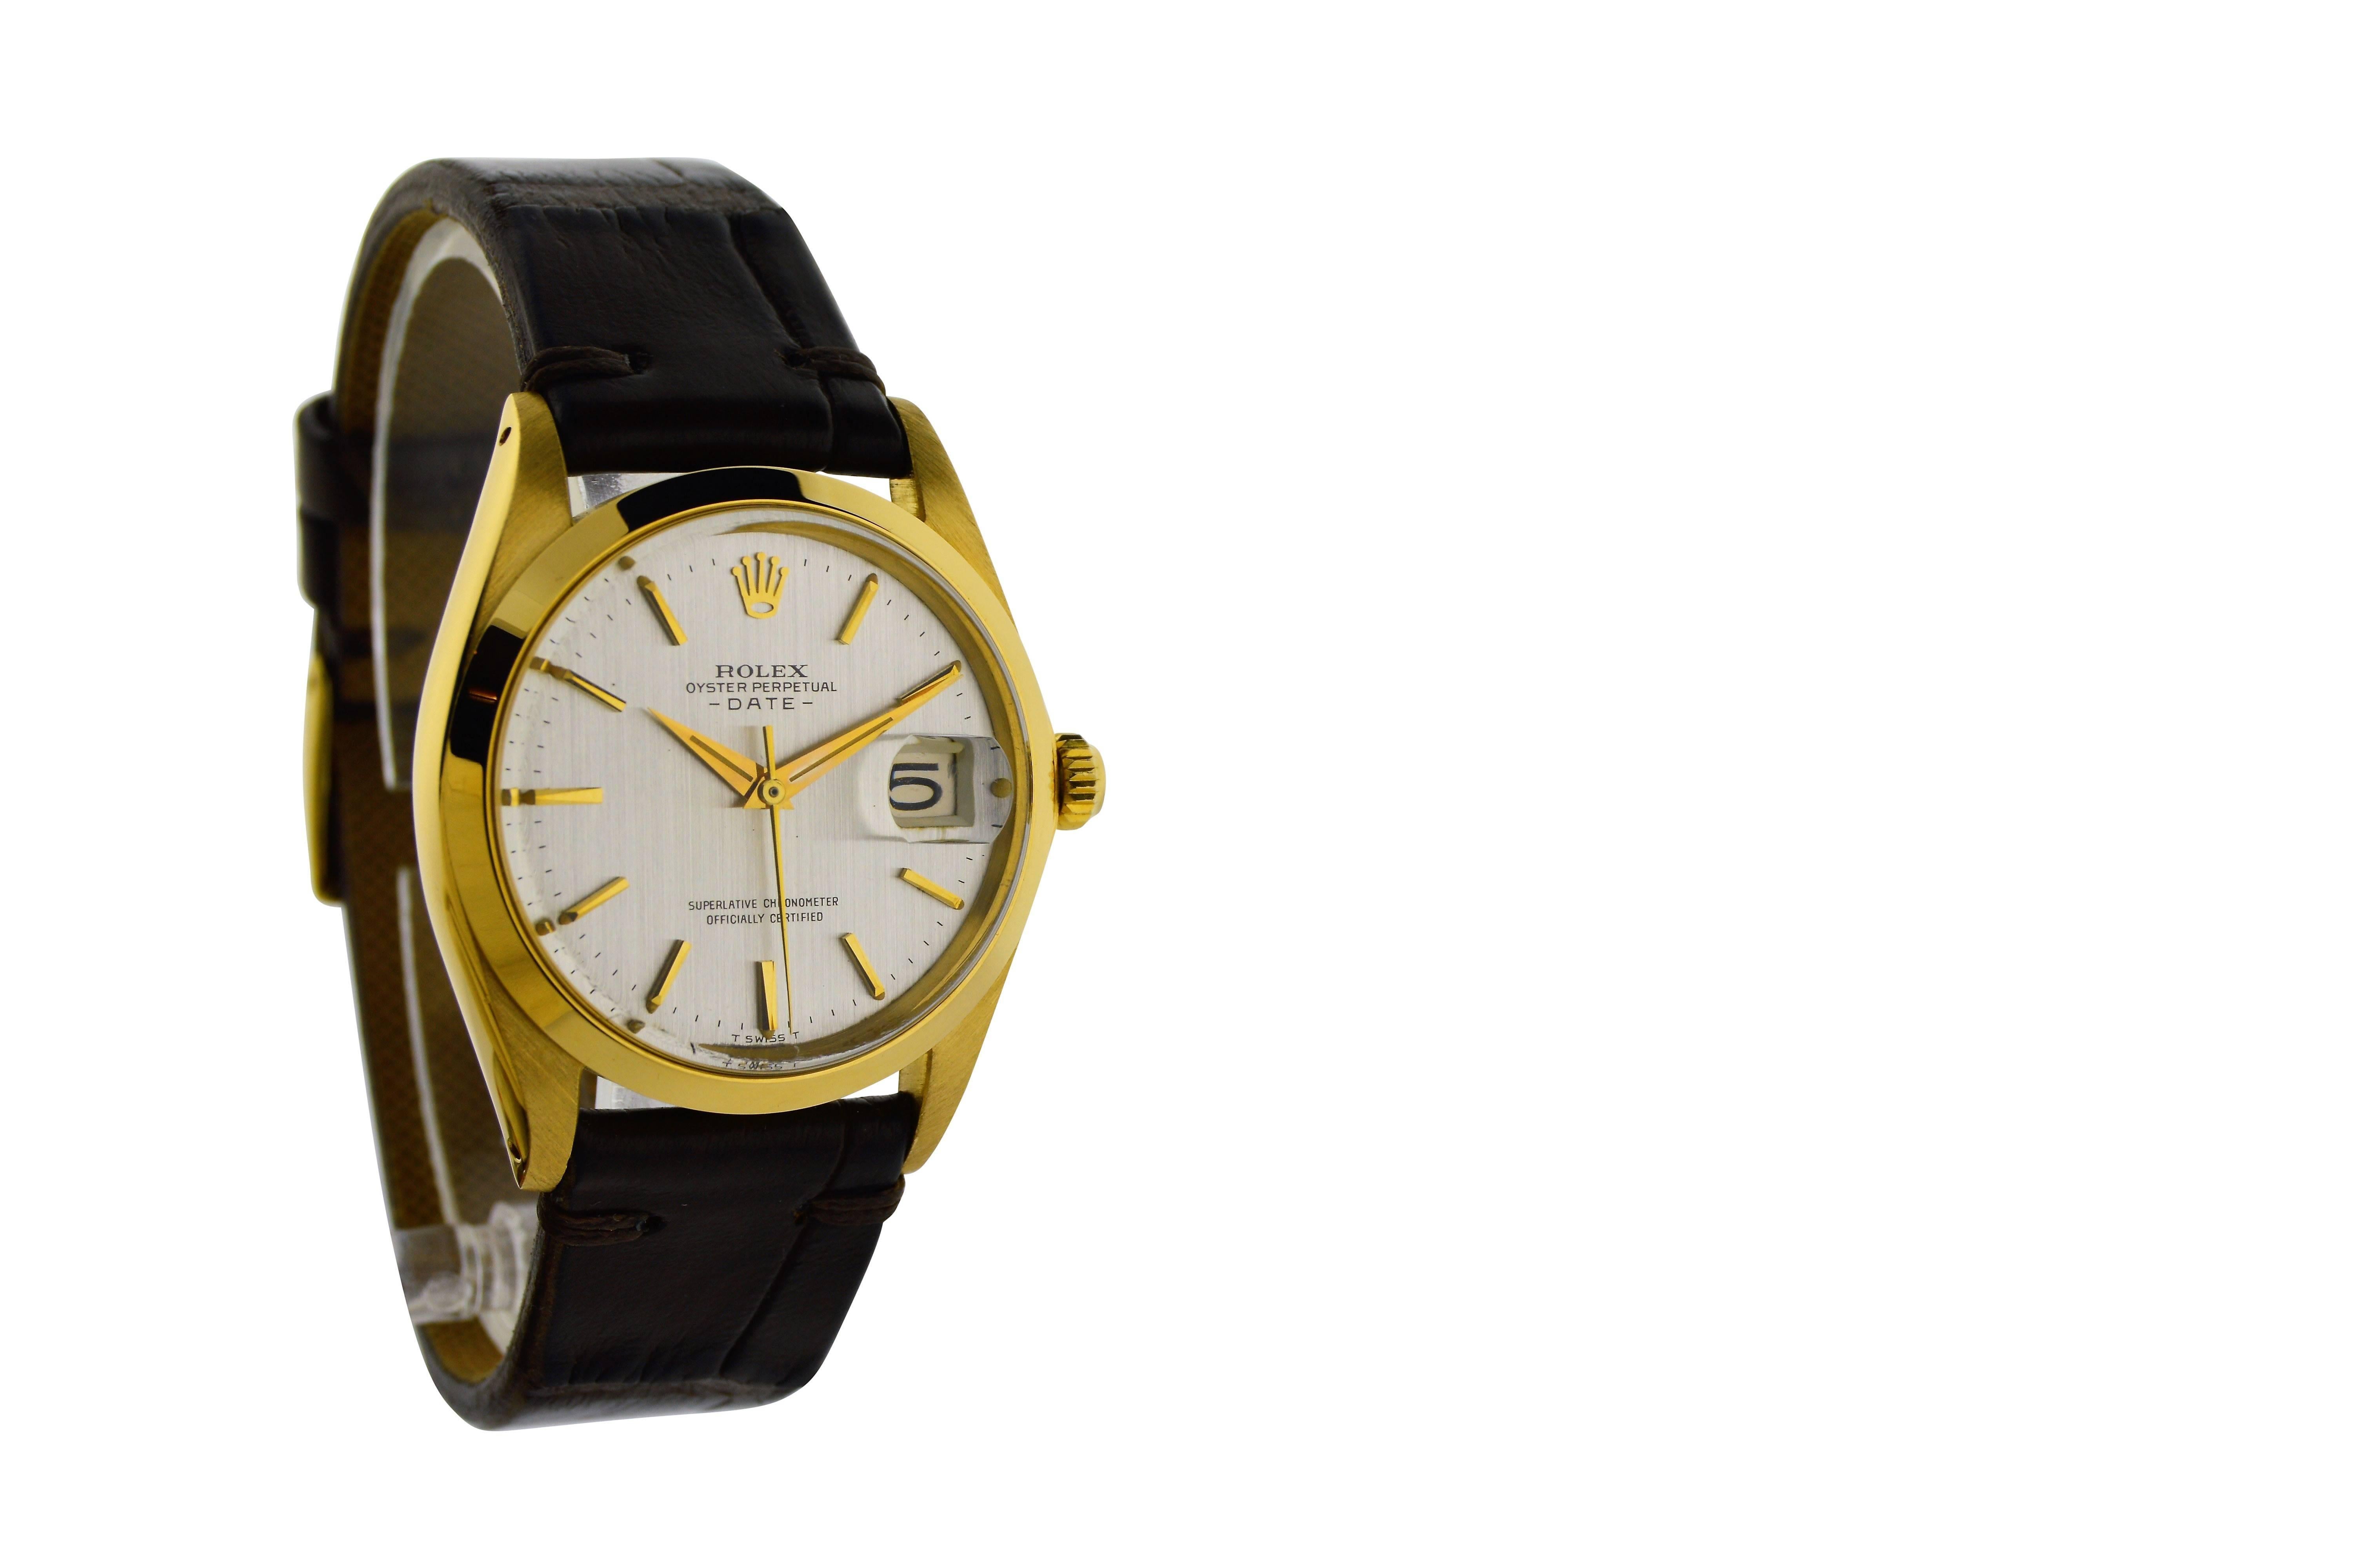 FACTORY / HOUSE: Rolex Watch Company
STYLE / REFERENCE: Oyster Perpetual Date / Ref. 1500
METAL / MATERIAL: 18Kt. Yellow Gold
DIMENSIONS:  41mm  X  36mm
CIRCA: 1965
MOVEMENT / CALIBER: 26 Jewels / Perpetual / Cal.1560
DIAL / HANDS: Original Silver